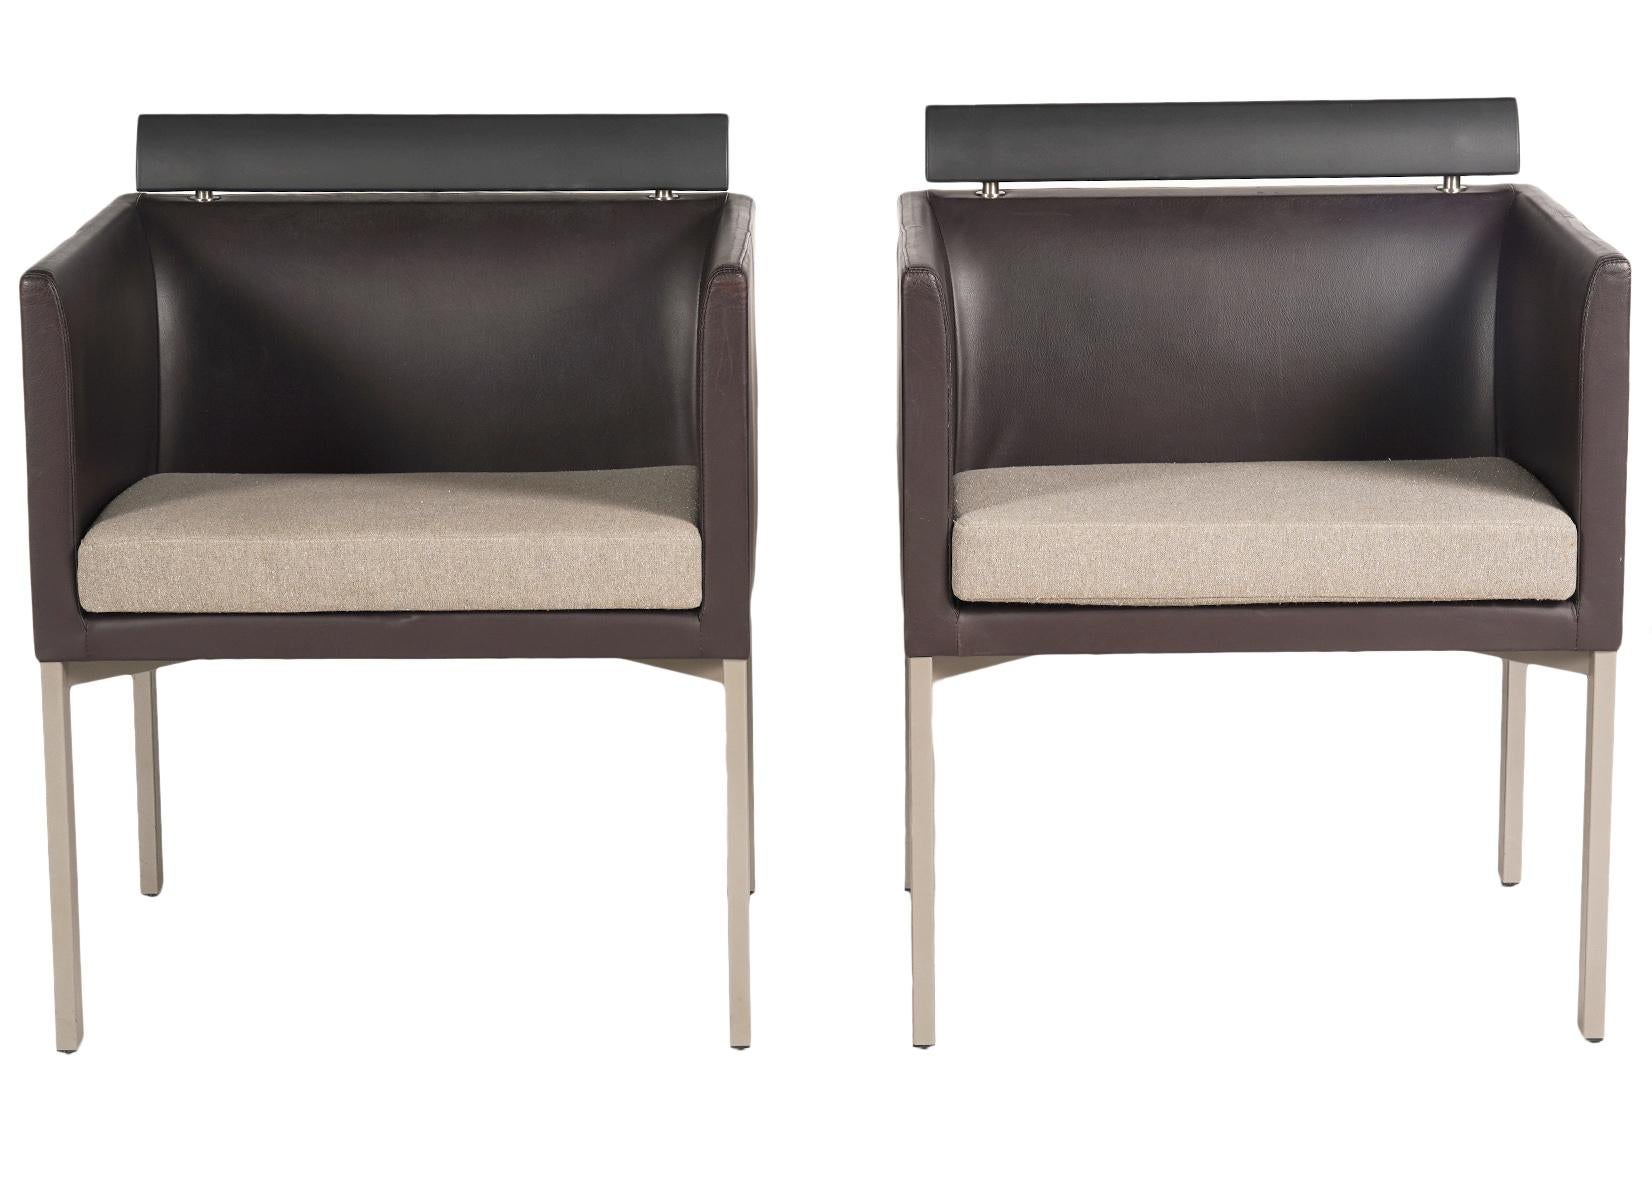 These modern Italian leather club chairs in the style of Antonio Citterio features a square design with sides and back of the same height. The backrests are mounted with shaped rubber rails as added back support. The flat seats are covered with gray